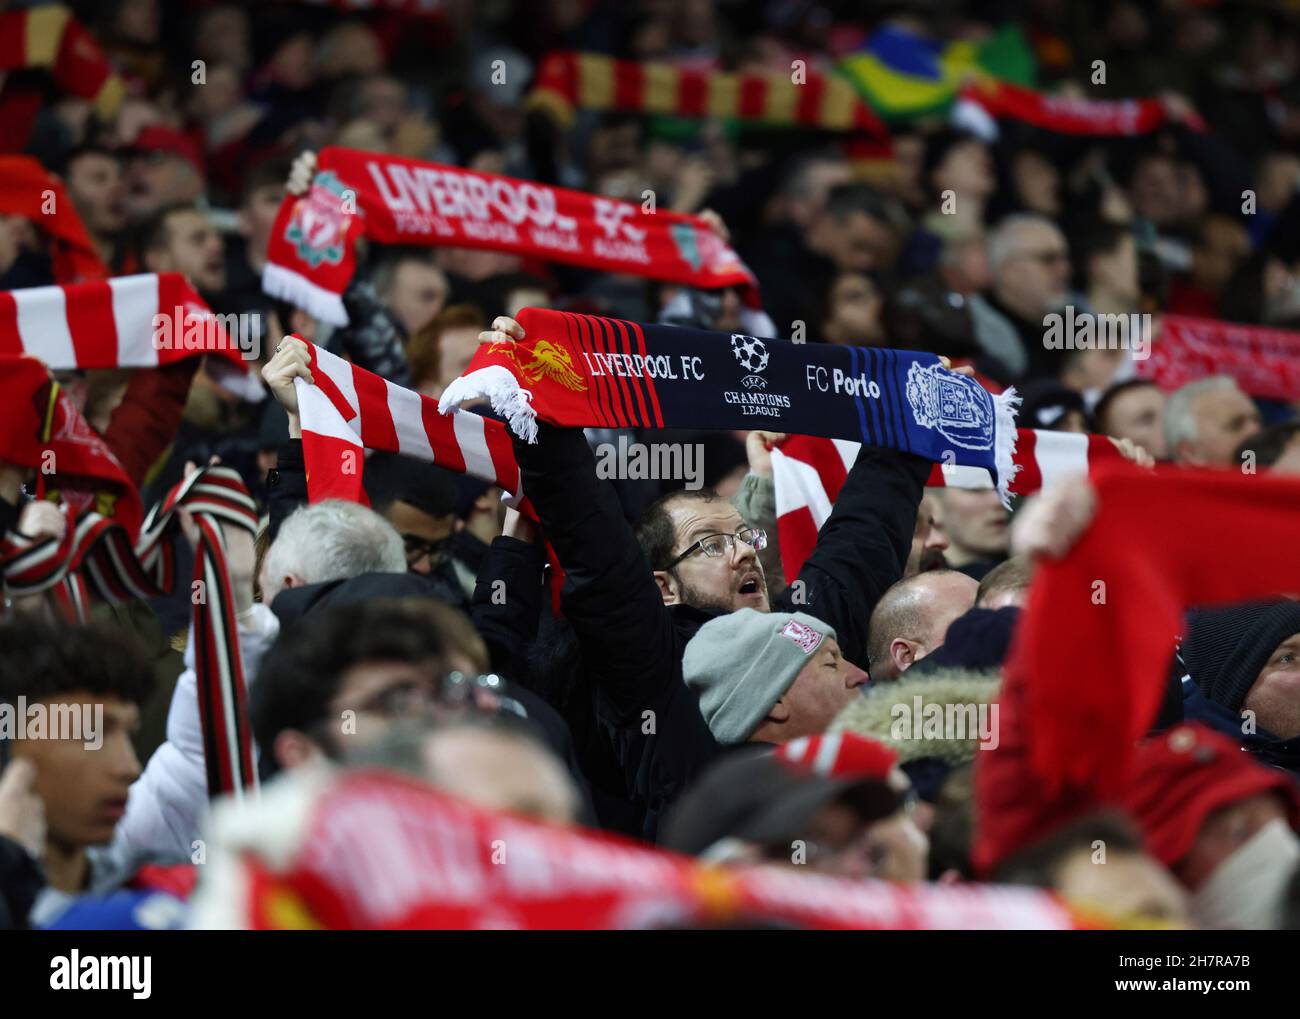 Liverpool, England, 24th November 2021. Liverpool fans sing their anthem “you’ll never walk alone”  during the UEFA Champions League match at Anfield, Liverpool. Picture credit should read: Darren Staples / Sportimage Credit: Sportimage/Alamy Live News Stock Photo